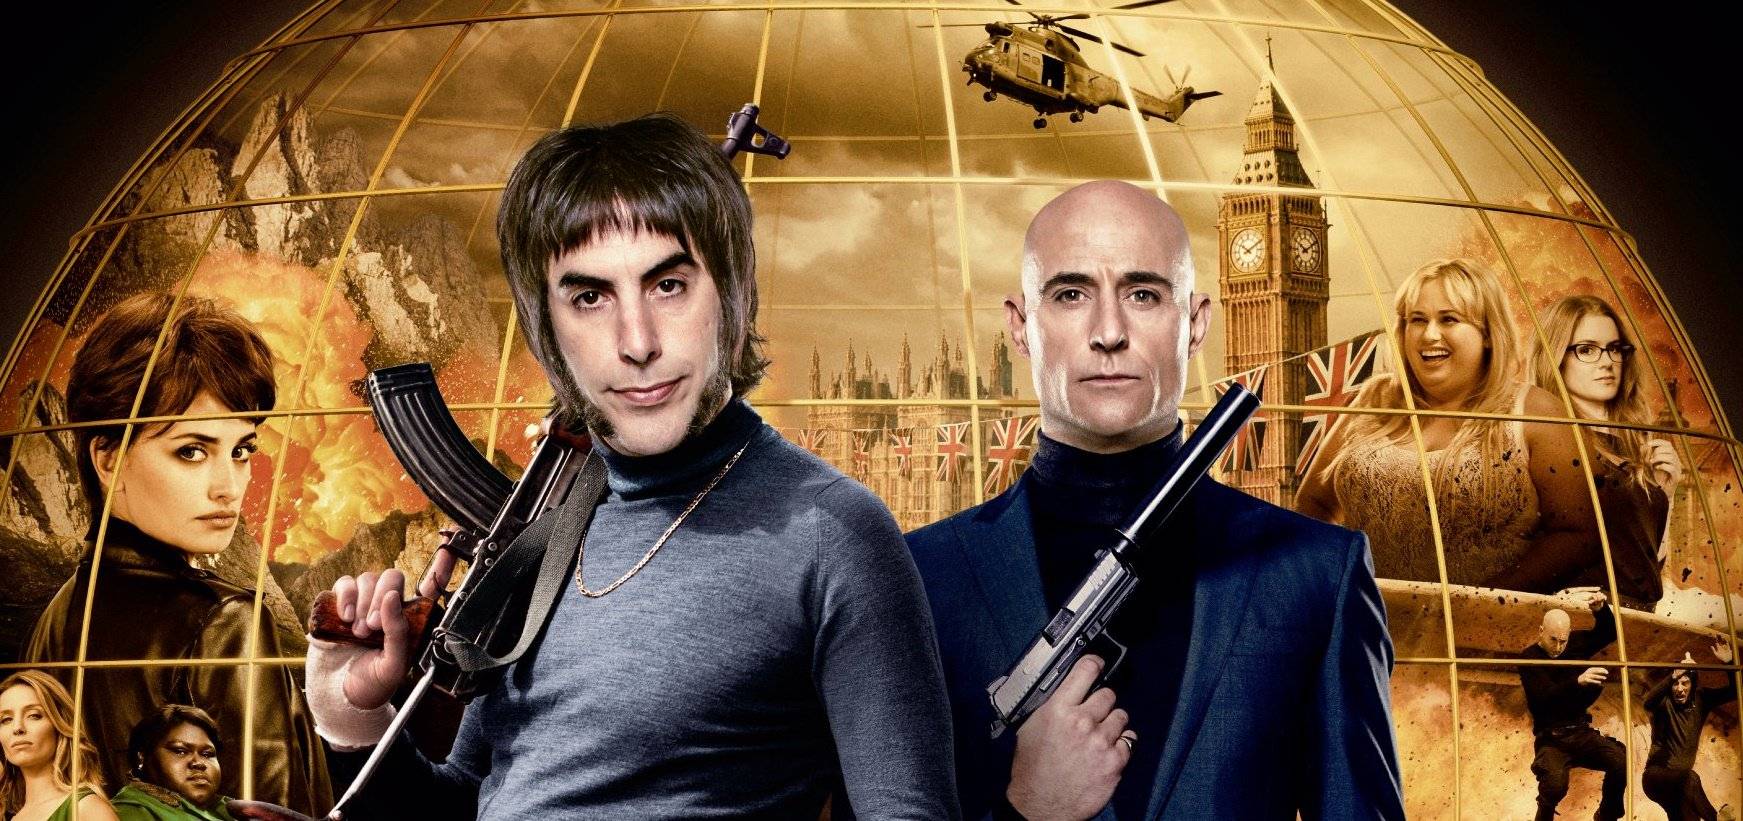 Xem Phim Anh Em Nhà Grimsby, The Brothers Grimsby 2016